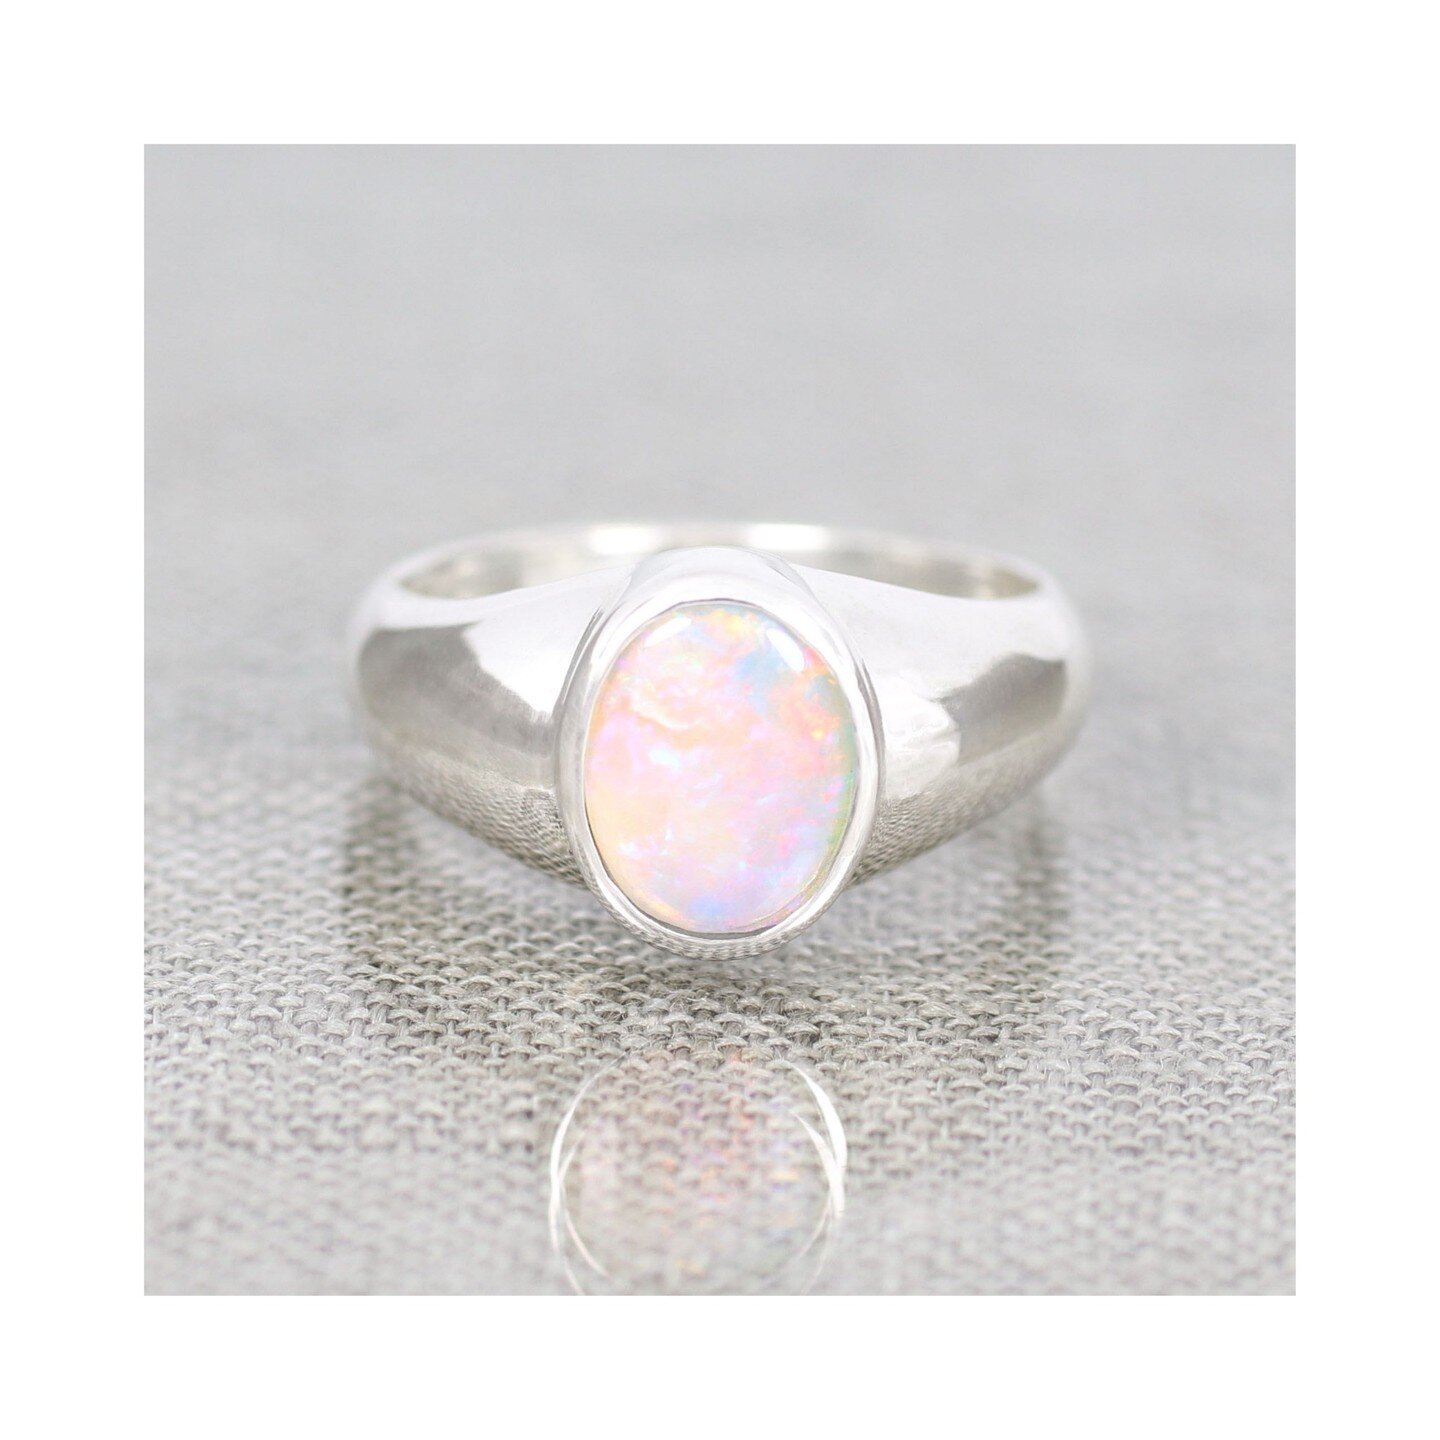 This bold beauty, s o p h i a, is now available on our website in size O 1/2

If you love this ring, but are after a different size and/or perhaps even a different gemstone, enquire now

#crystalopal #australianopal #opalring #sustainablejewellery #o